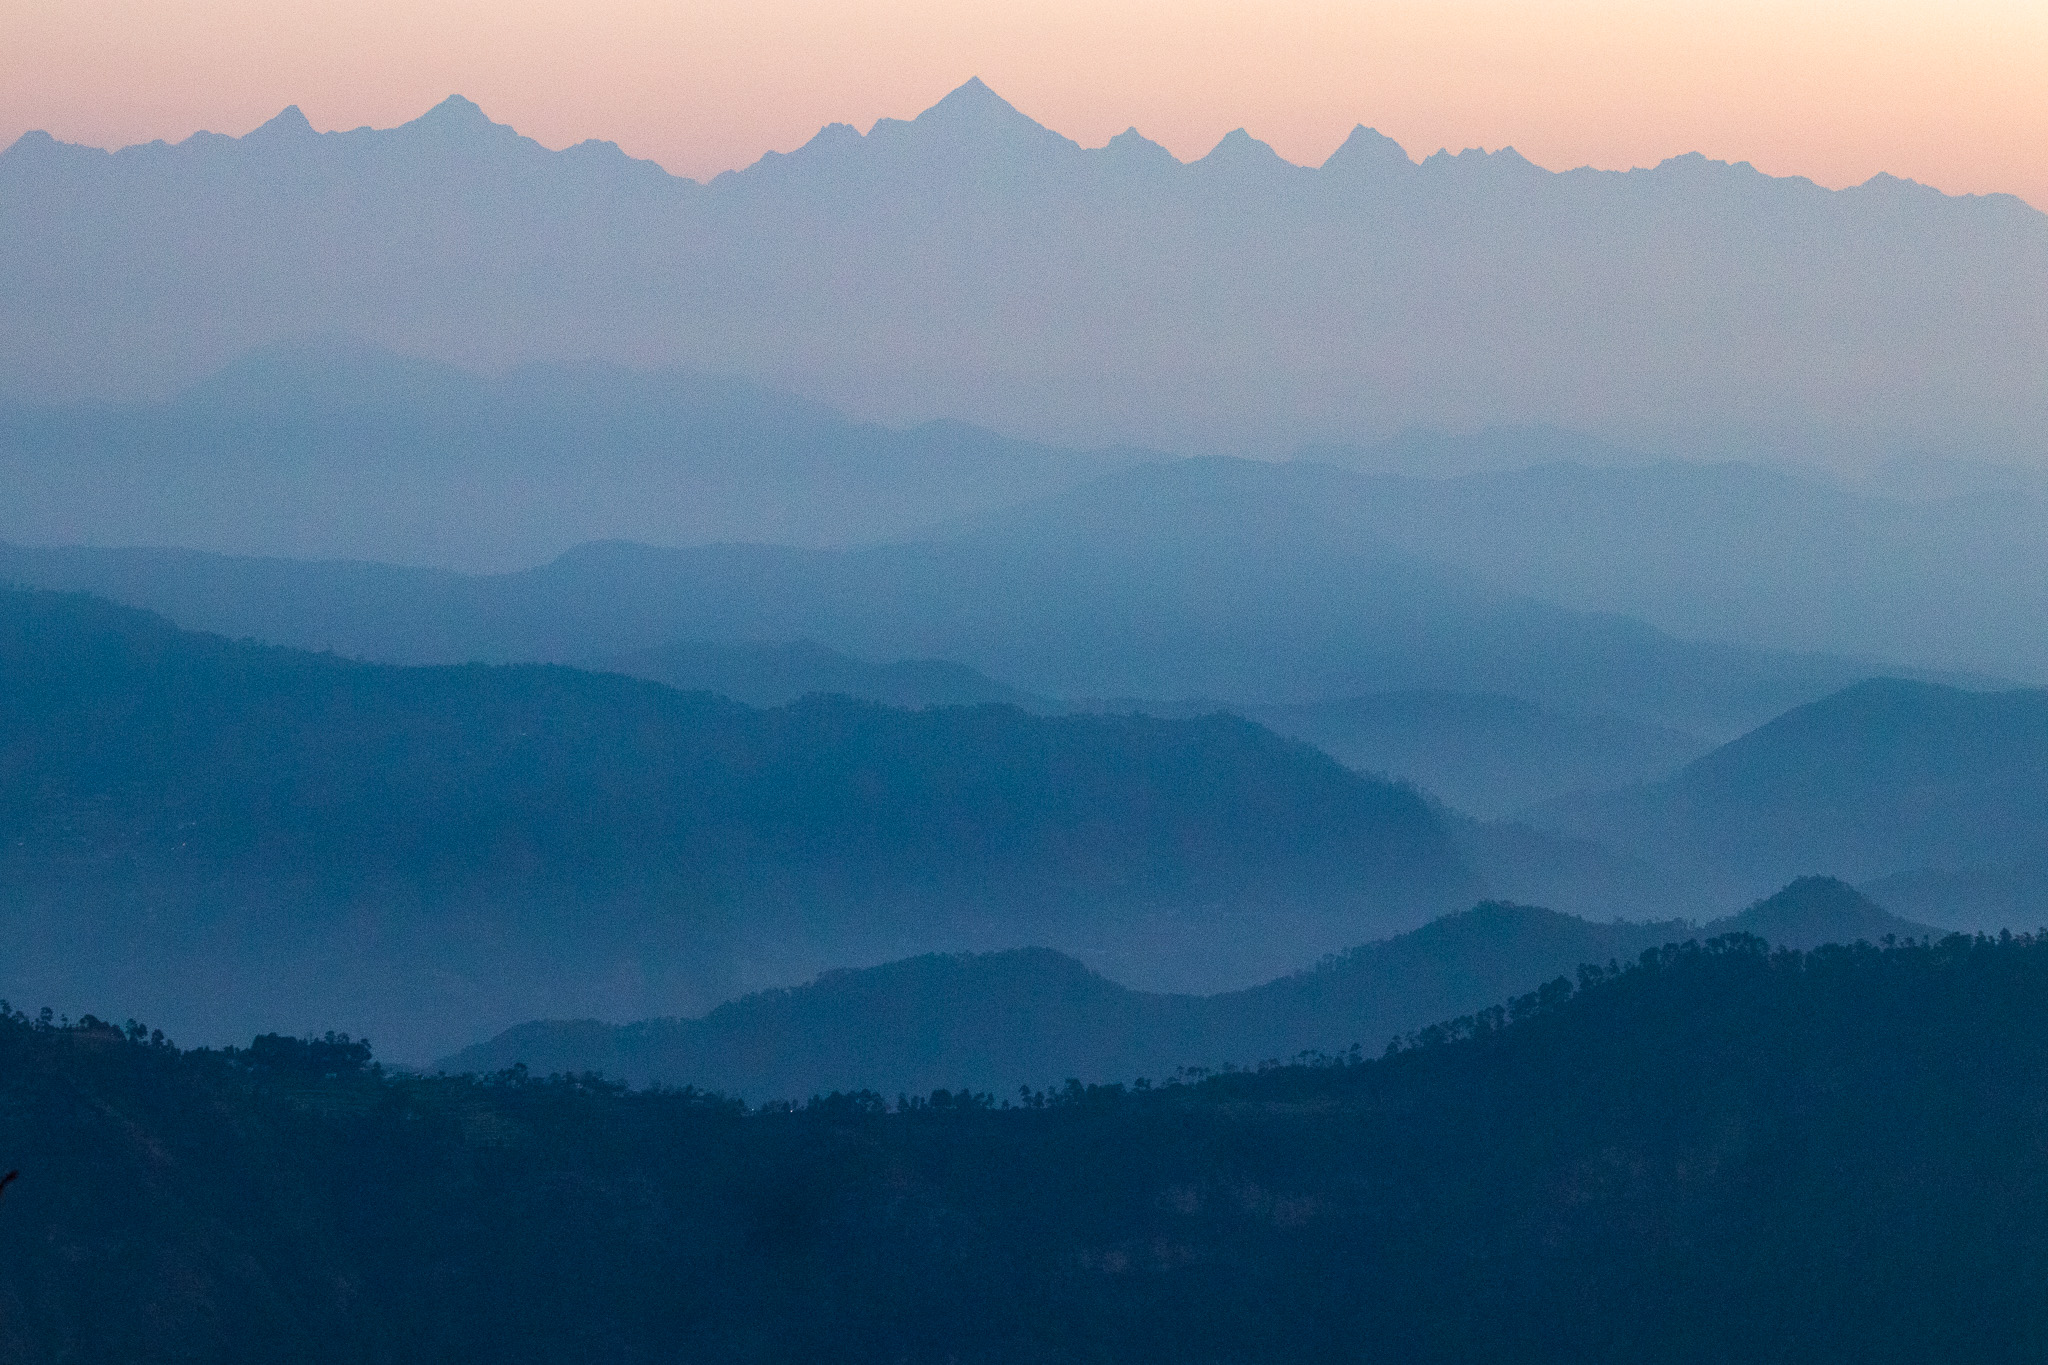 View of Himalayas just before sunrise from Binsar in Uttarakhand